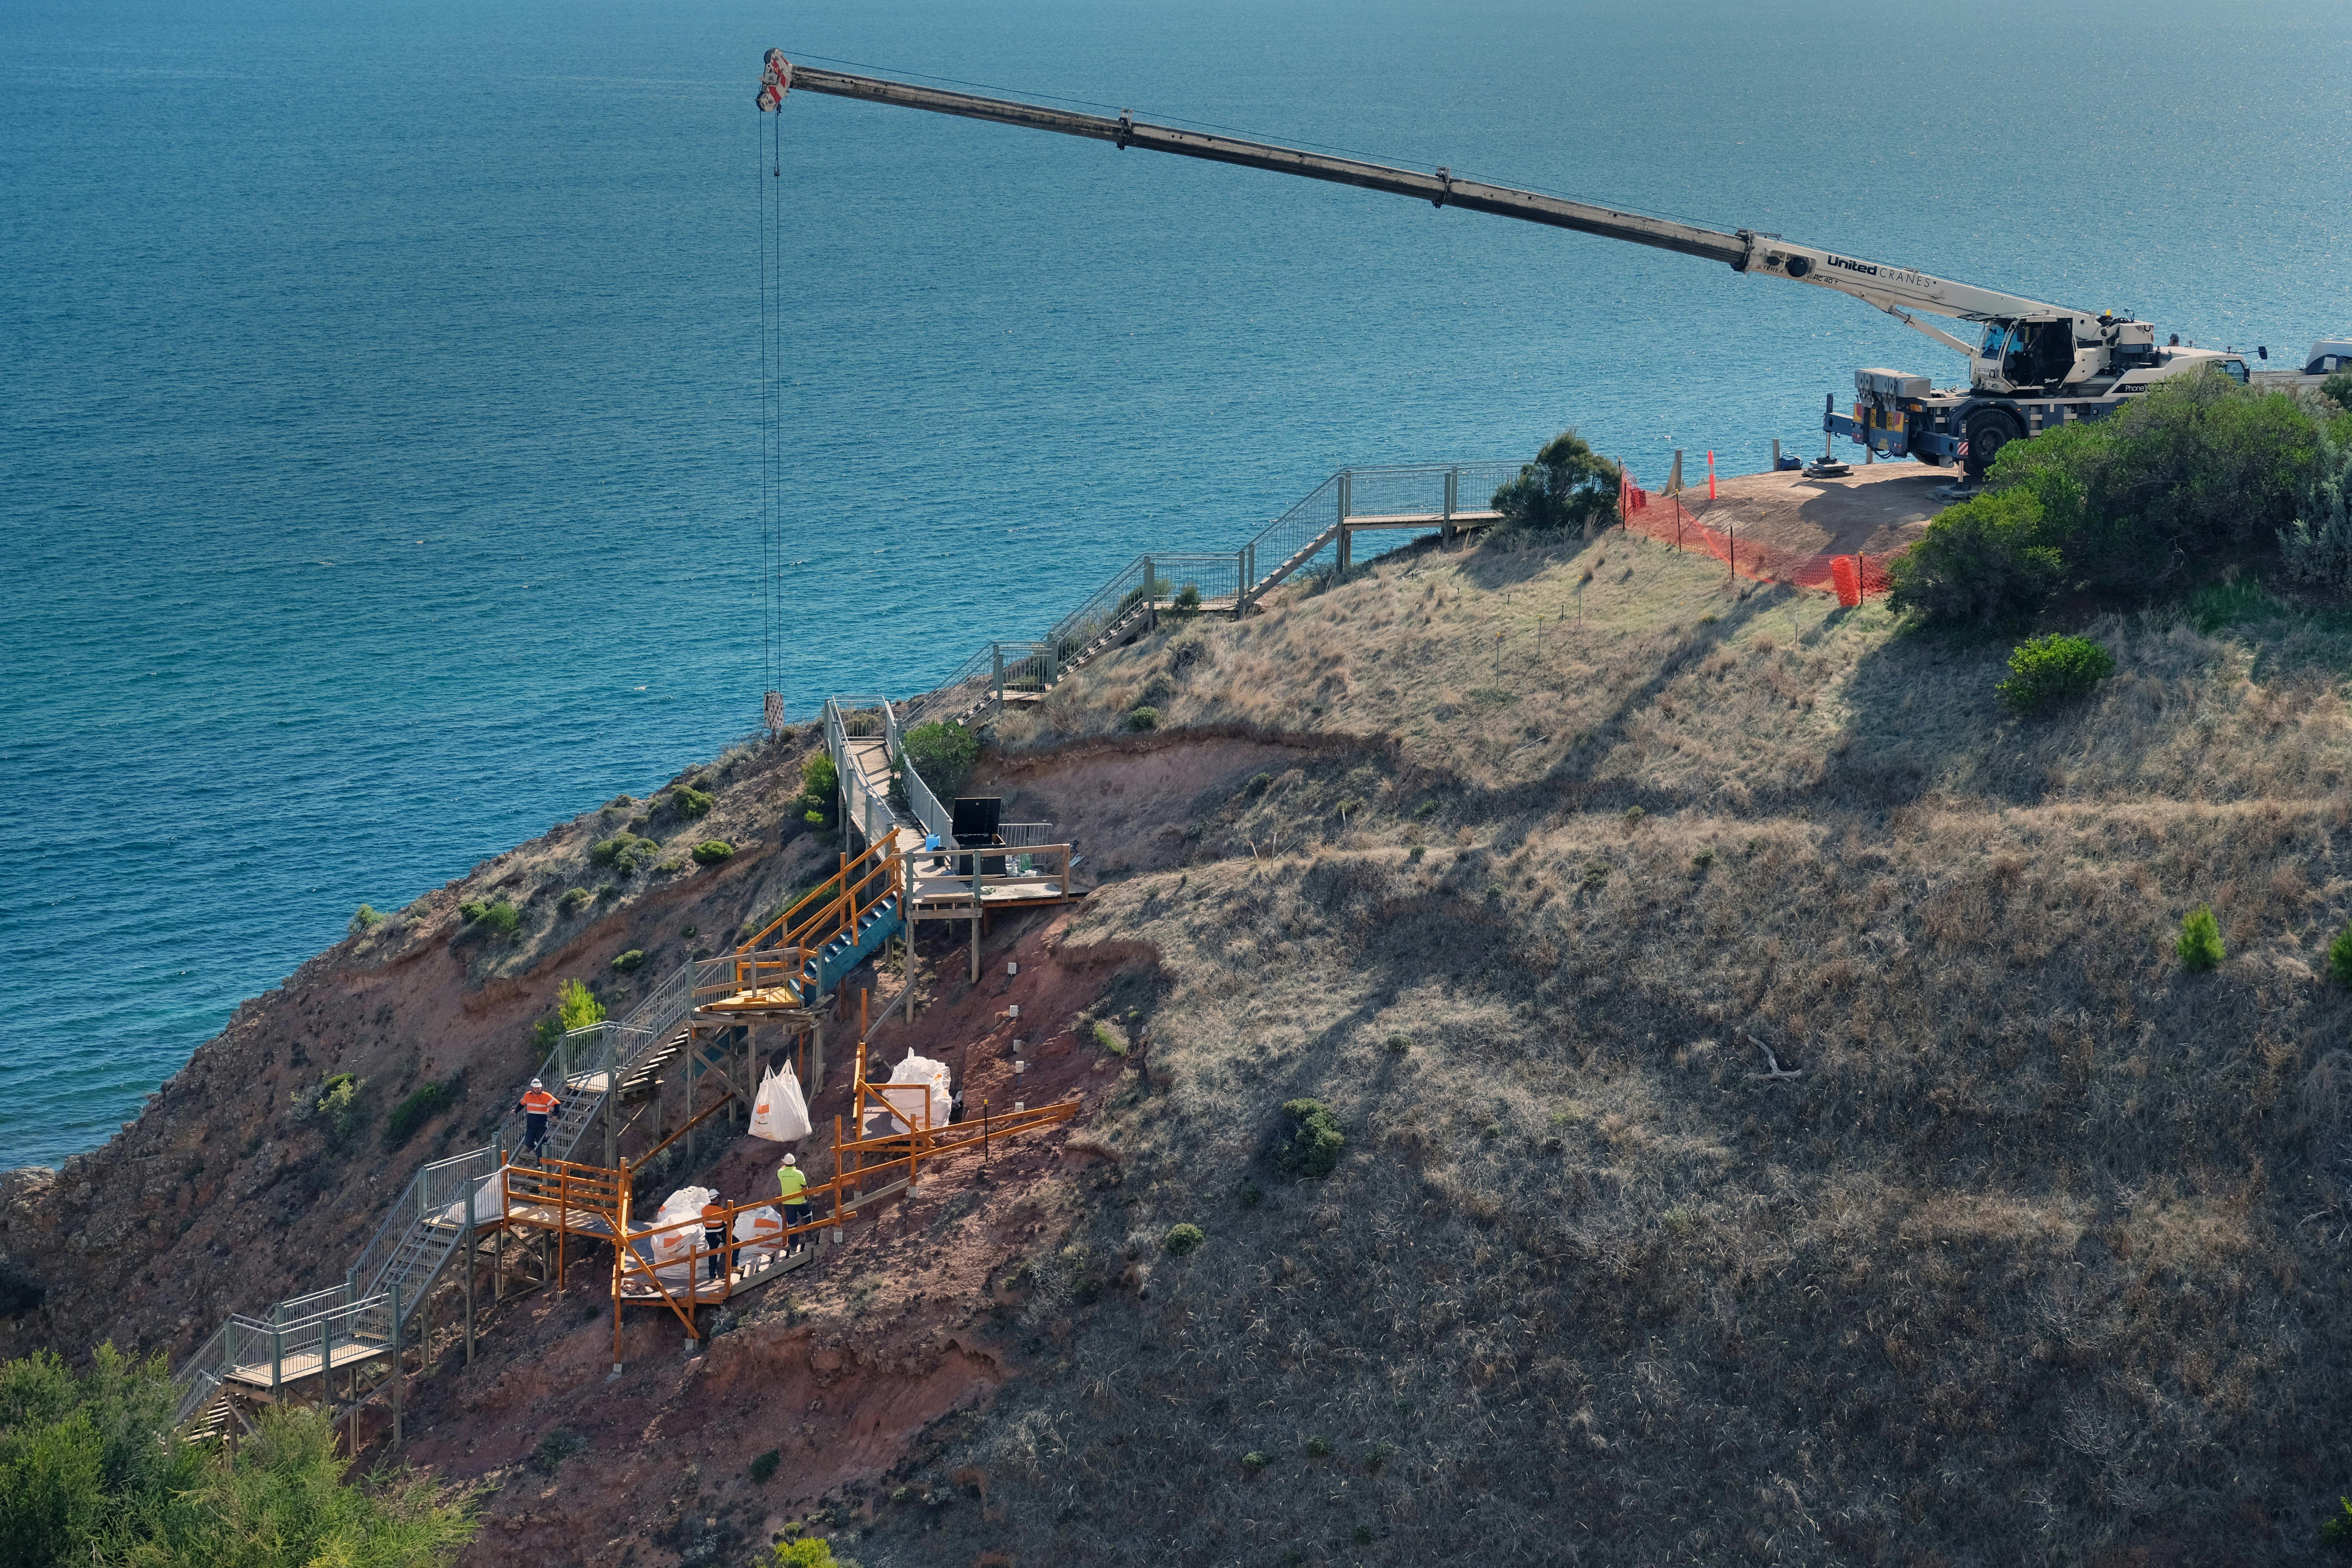 Crane removal of rock spoil. Image courtesy of Nick Smales